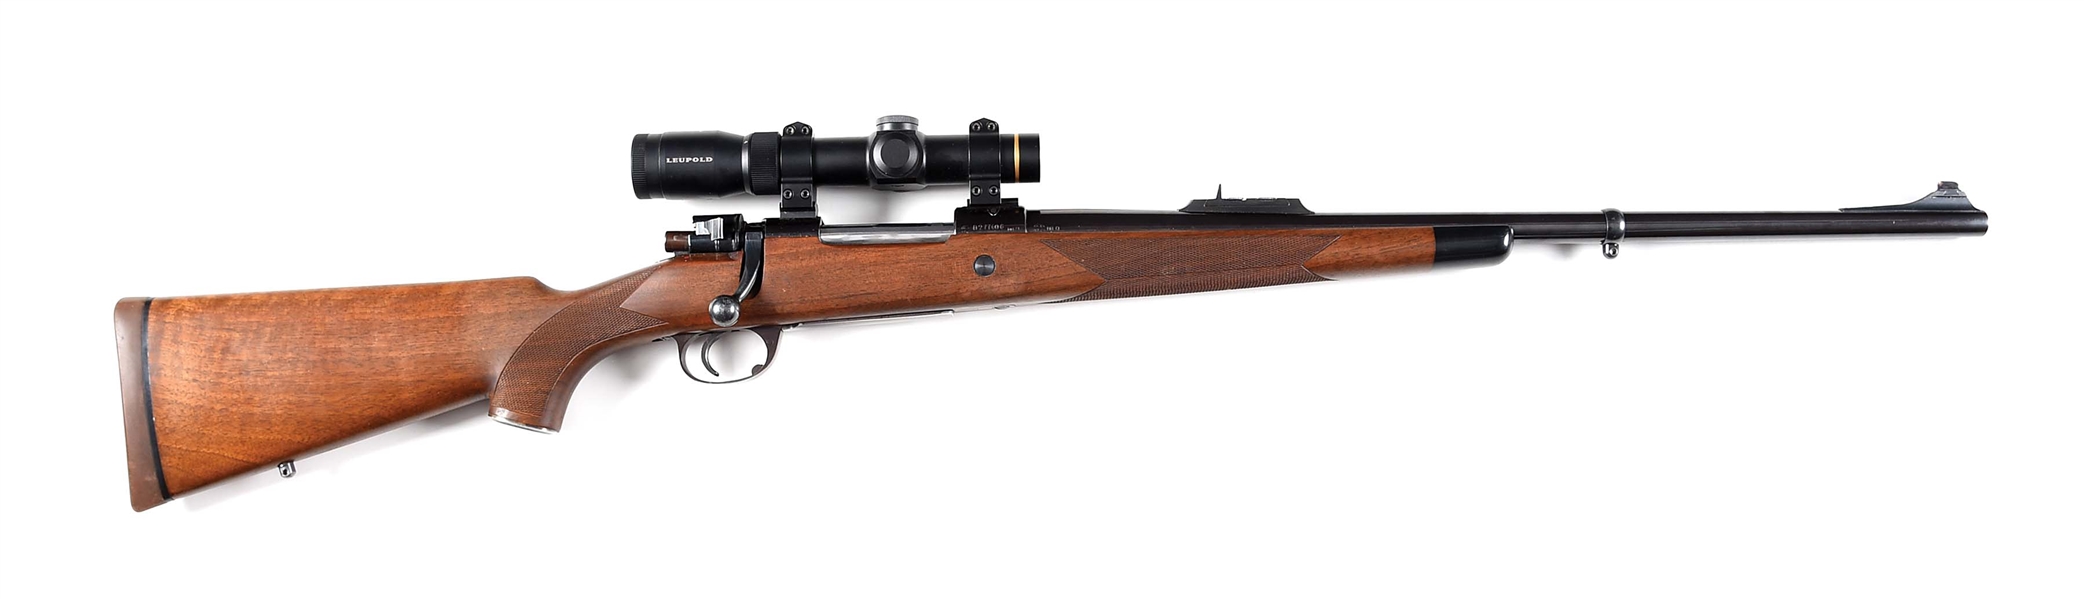 (M) WHITWORTH SPORTER BOLT ACTION RIFLE WITH SCOPE.